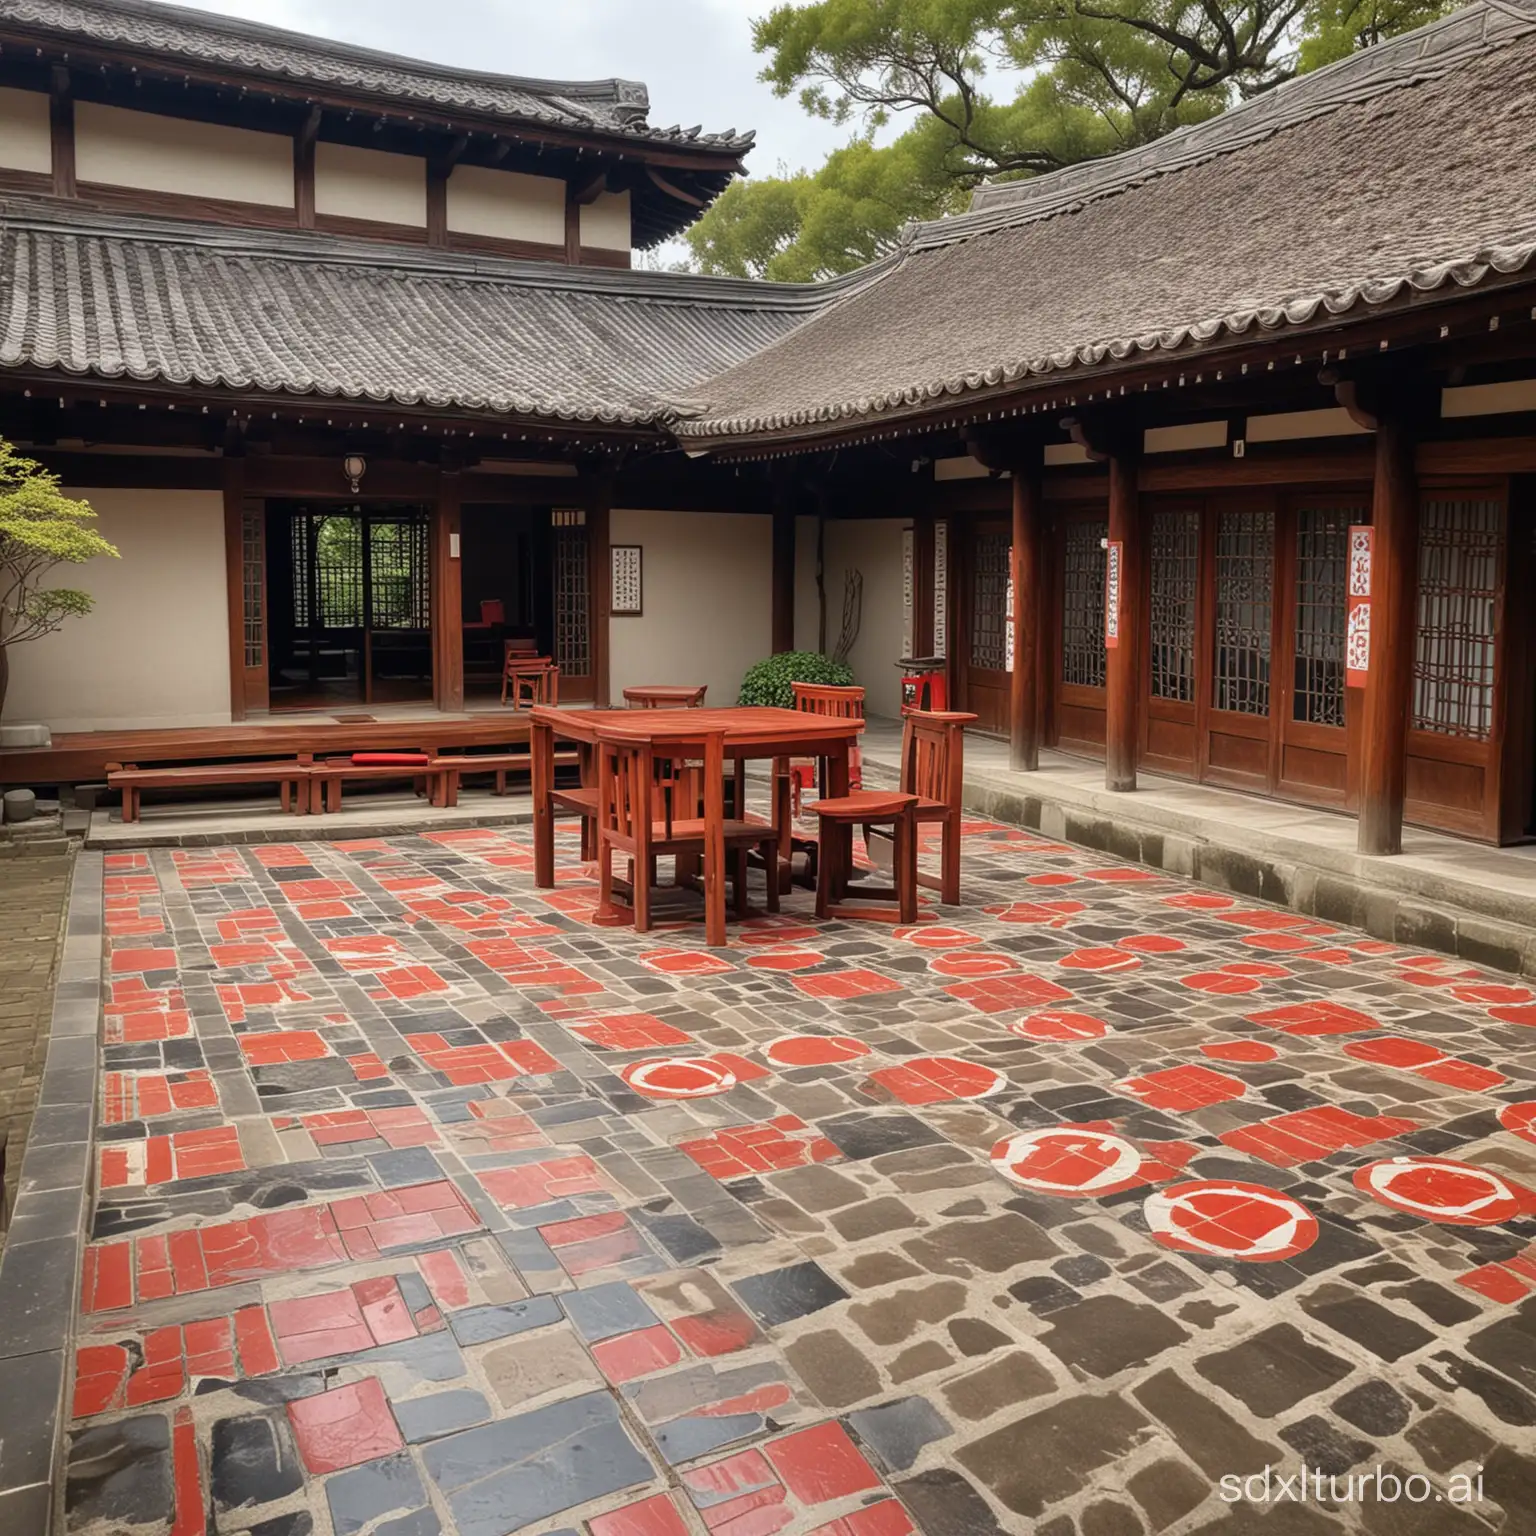 An ancient Japanese temple, with retro tiles, with bars, lively, there are five big red round tables, outdoor wooden floor


